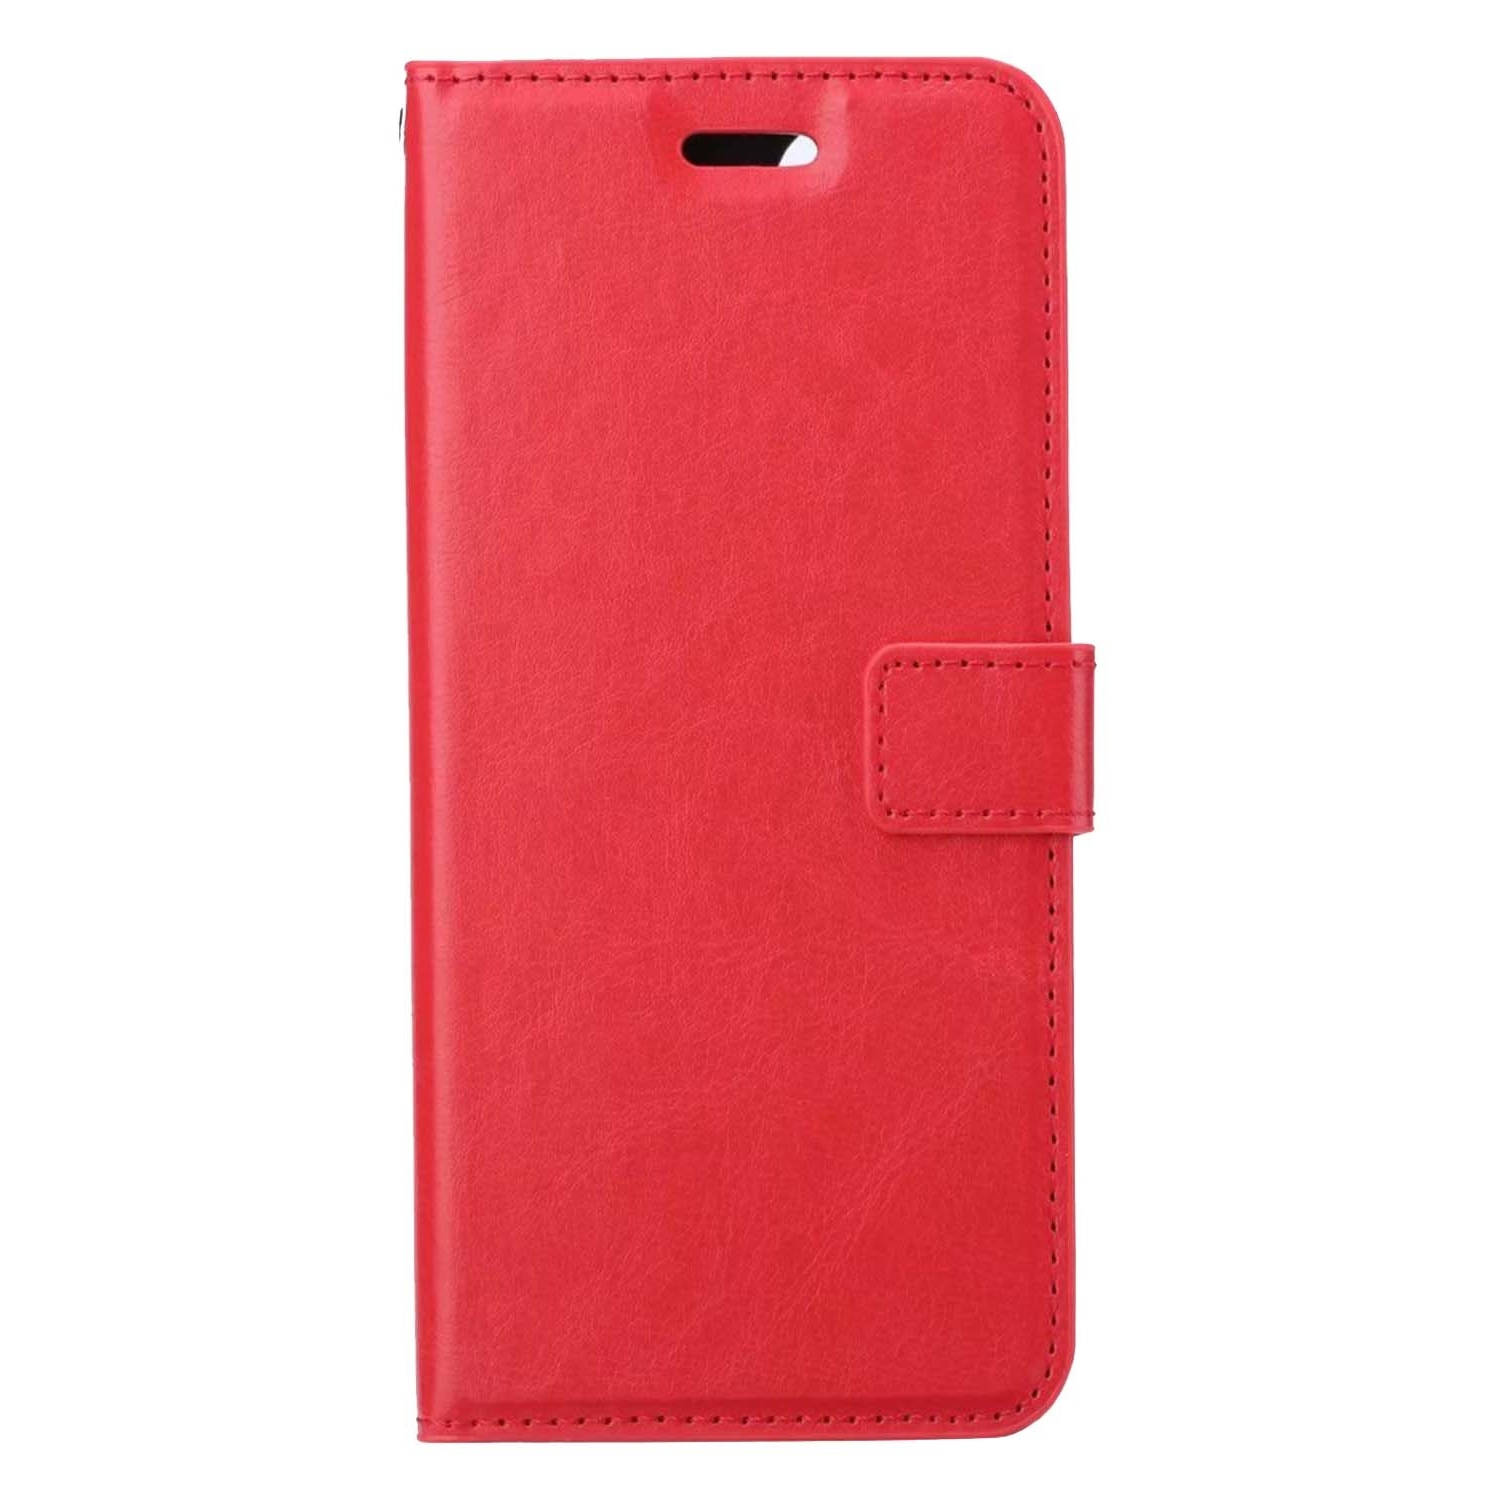 Basey iPhone 14 Pro Max Hoesje Book Case Kunstleer Cover Hoes iPhone 14 Pro Max-Rood